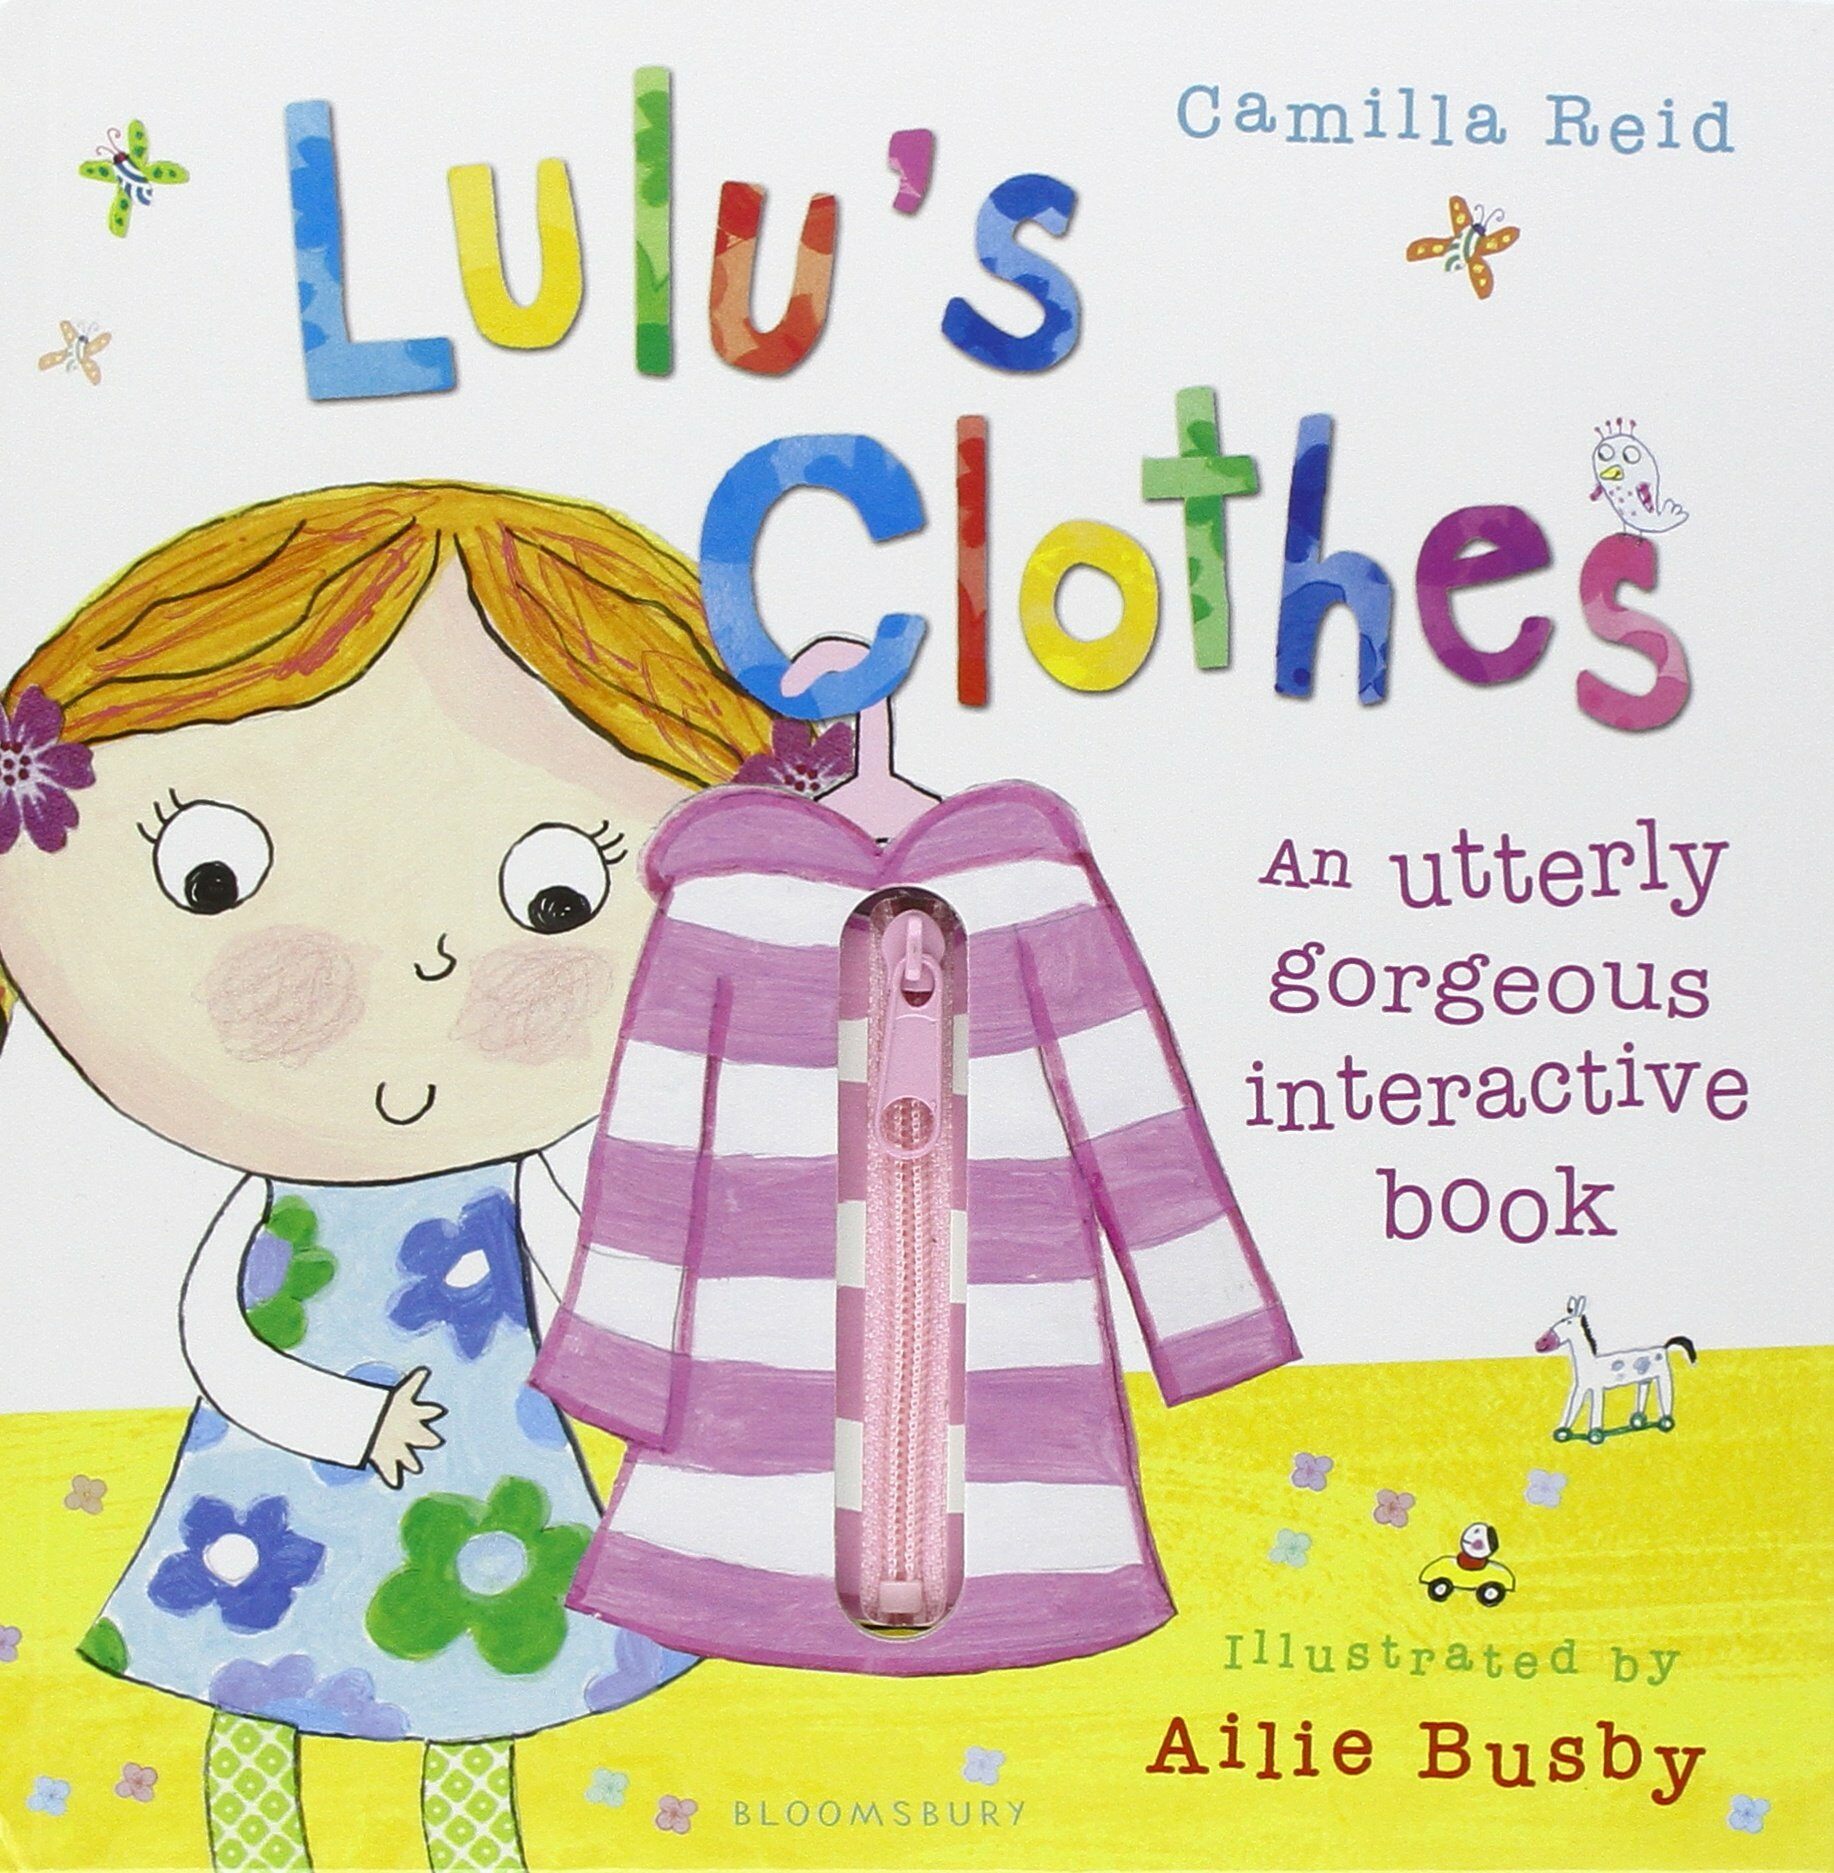 Lulus Clothes (Hardcover)